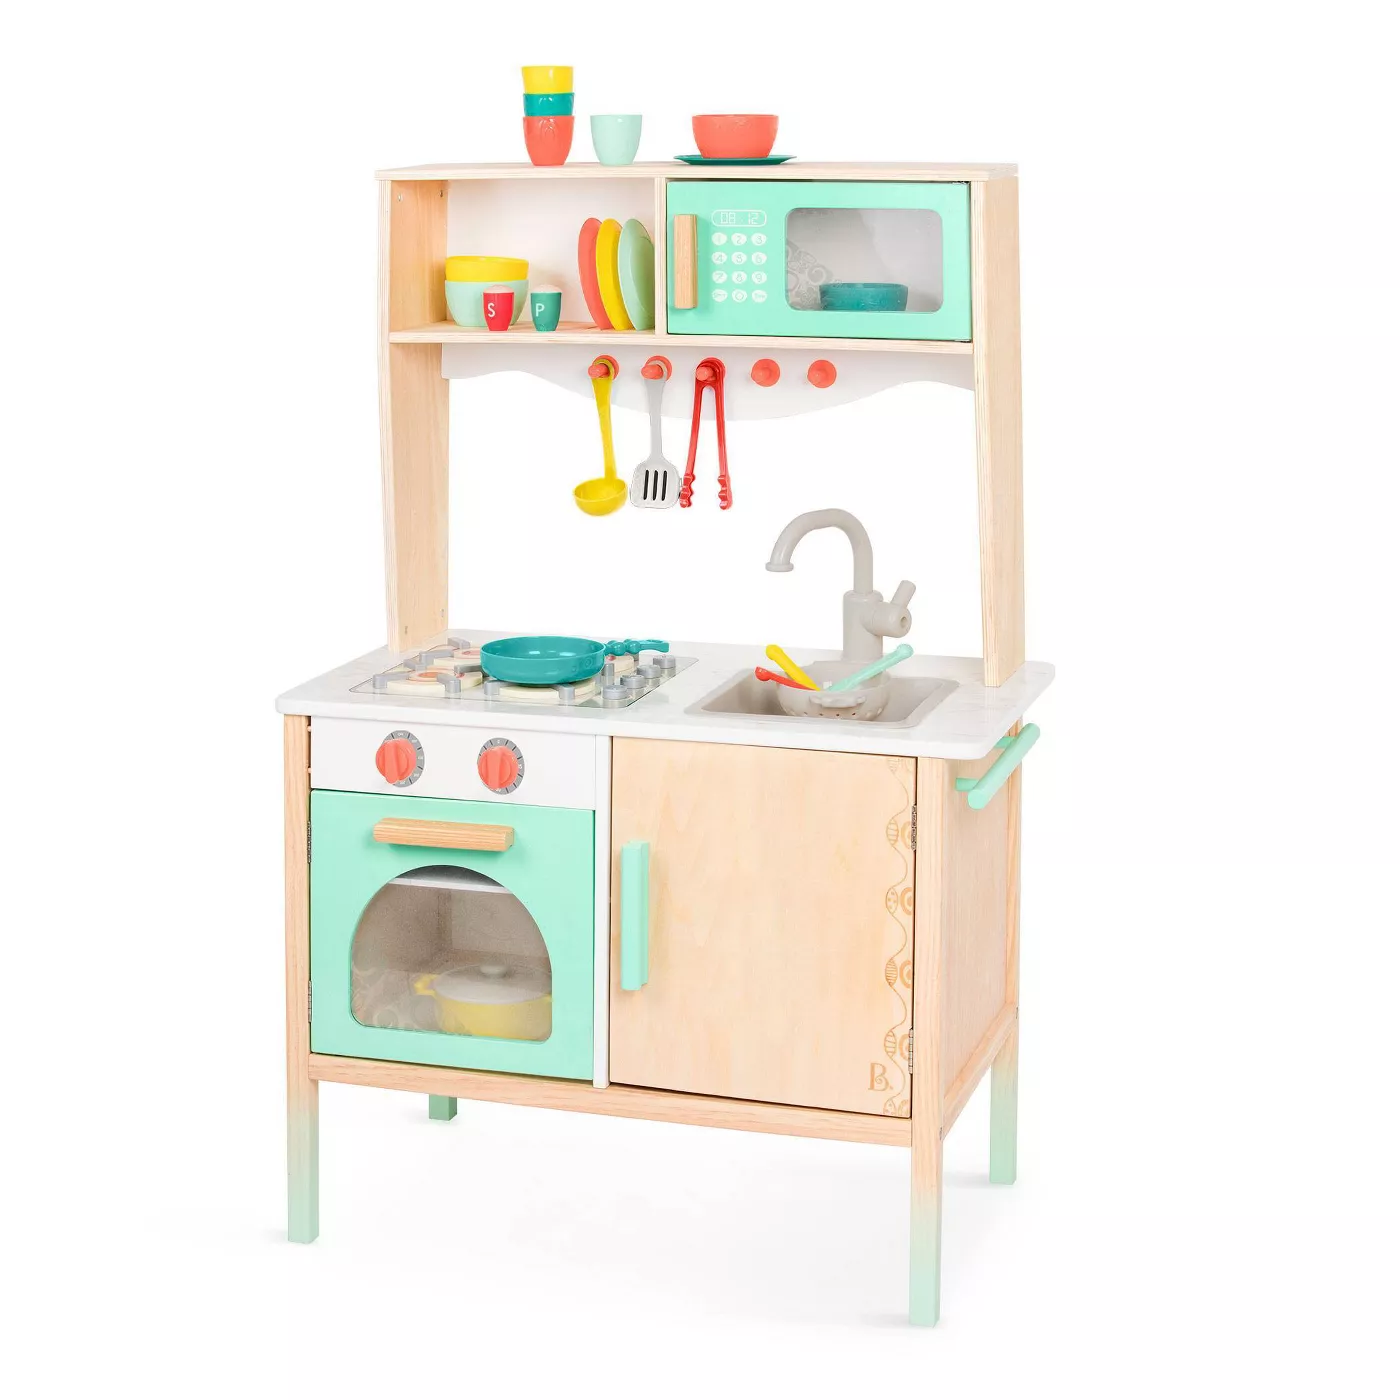 B. Toys Wooden Play Kitchen and Accessories - image 1 of 5